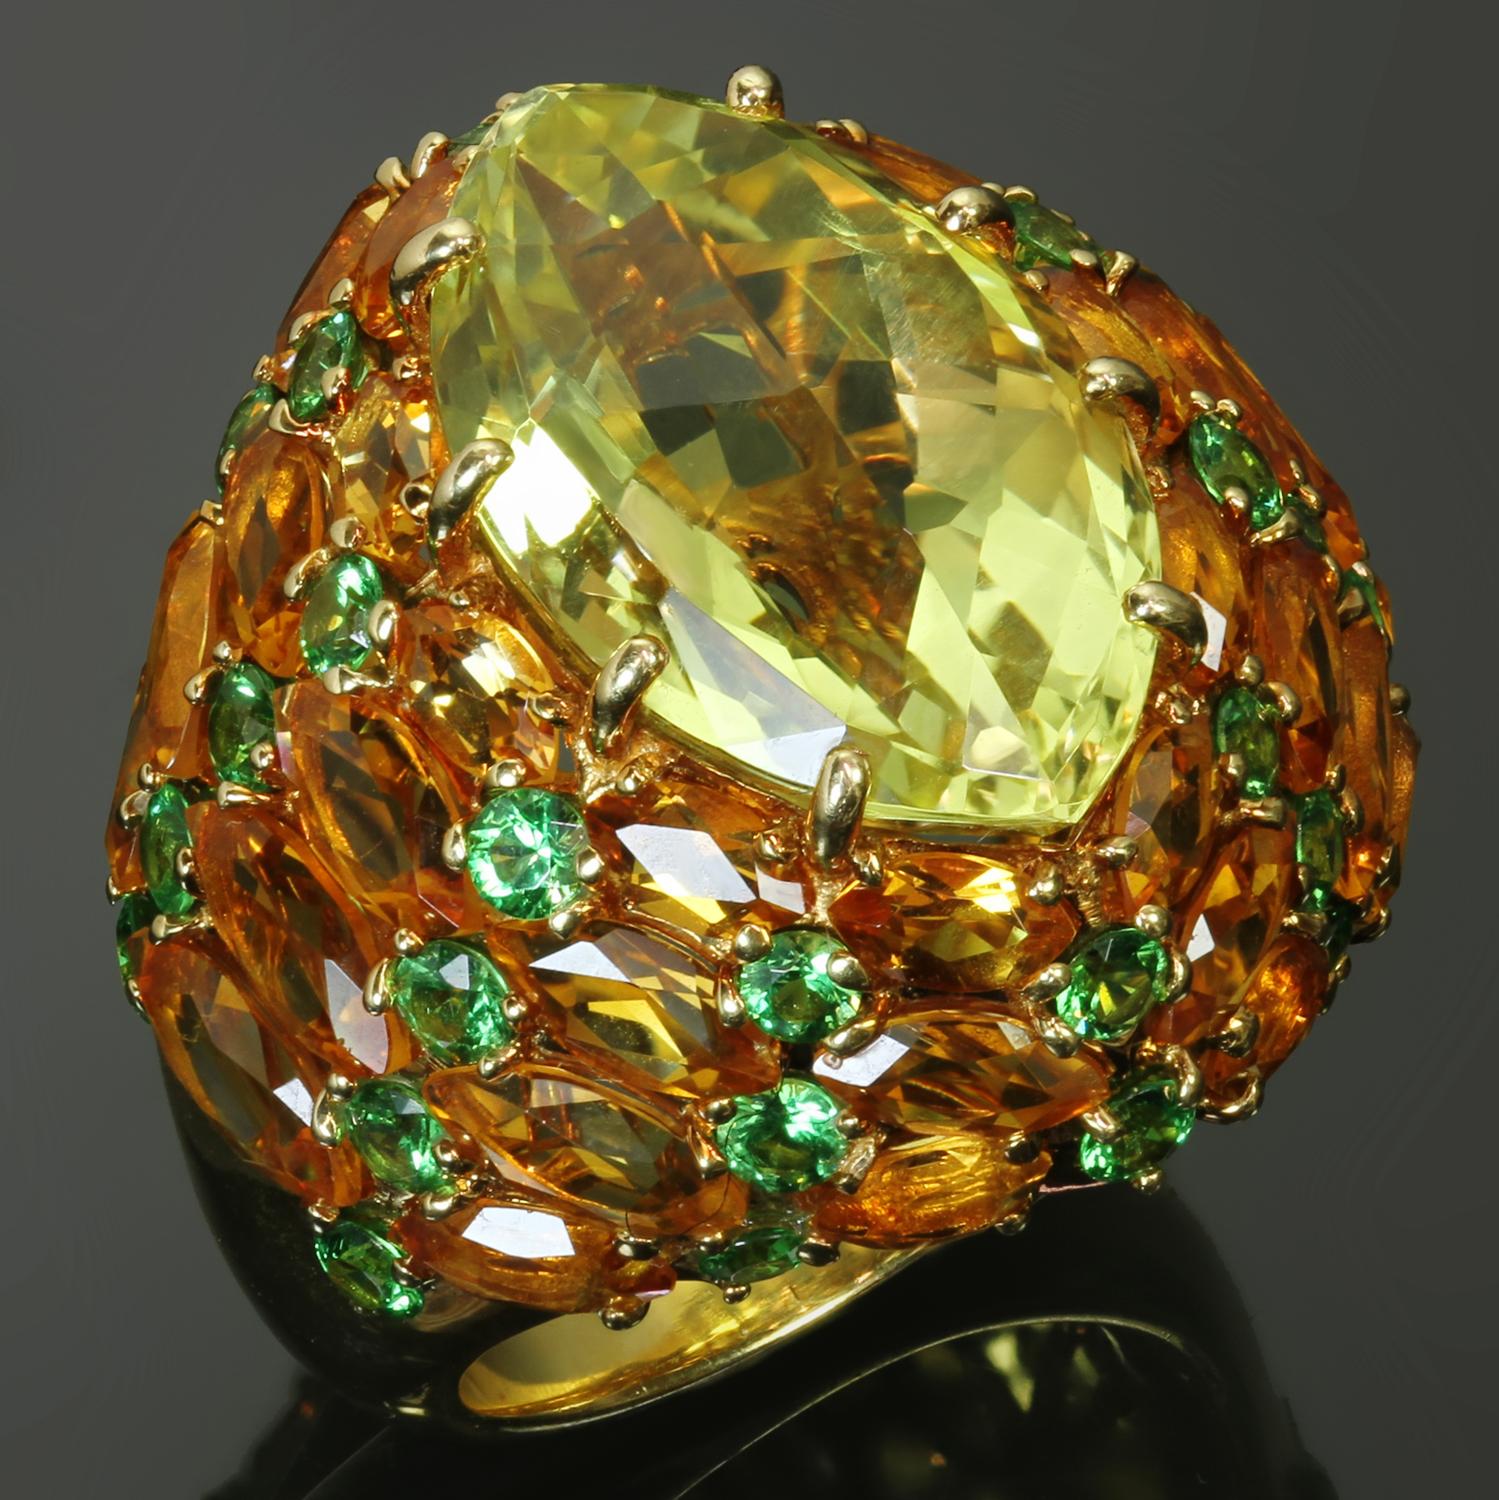 This stunning Rodney Rayner ring is crated in 18k yellow gold and set with a faceted marquise-cut citrine, yellow sapphires, and tsavorite garnets - all vibrant fine quality stones. The citrine measures 11.5mm x 18.0mm. Signed Rayner RHR, stamped